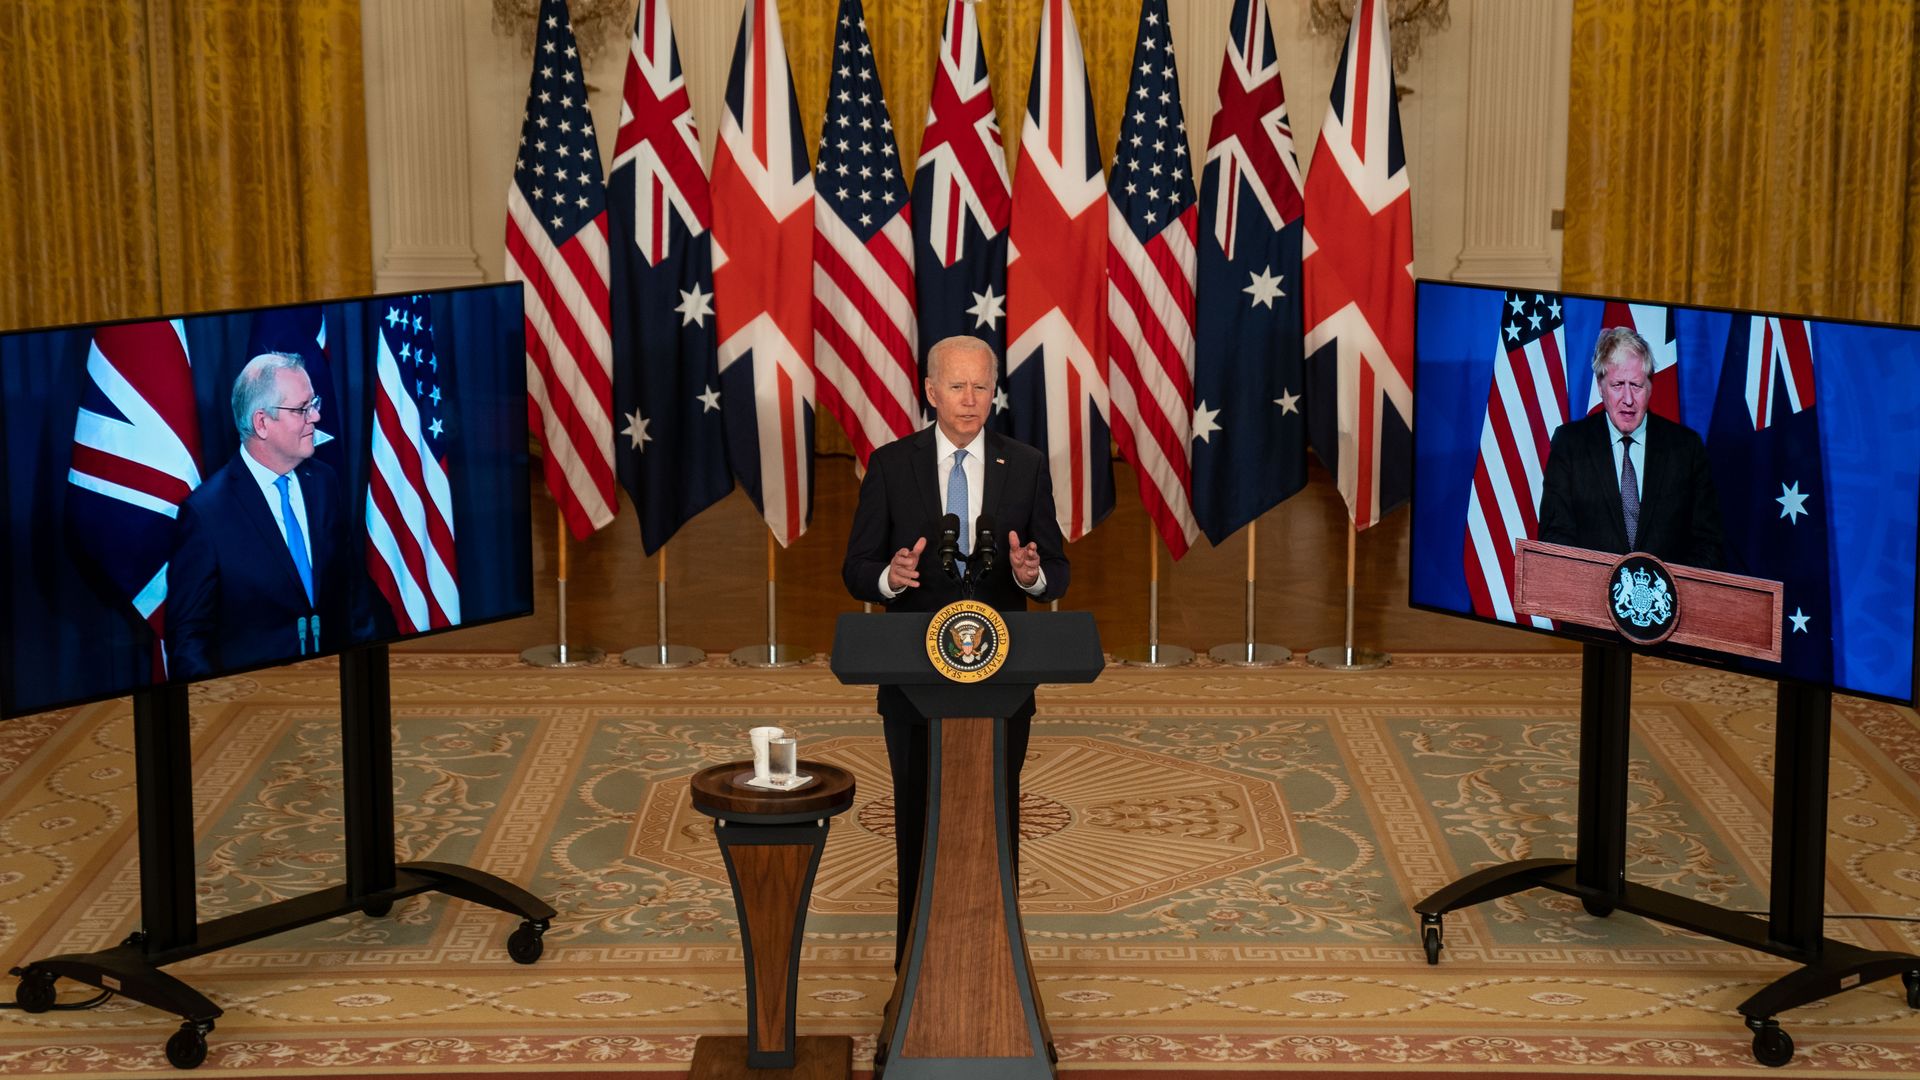 President Biden announcing the new security pact from the White House in September 2021.